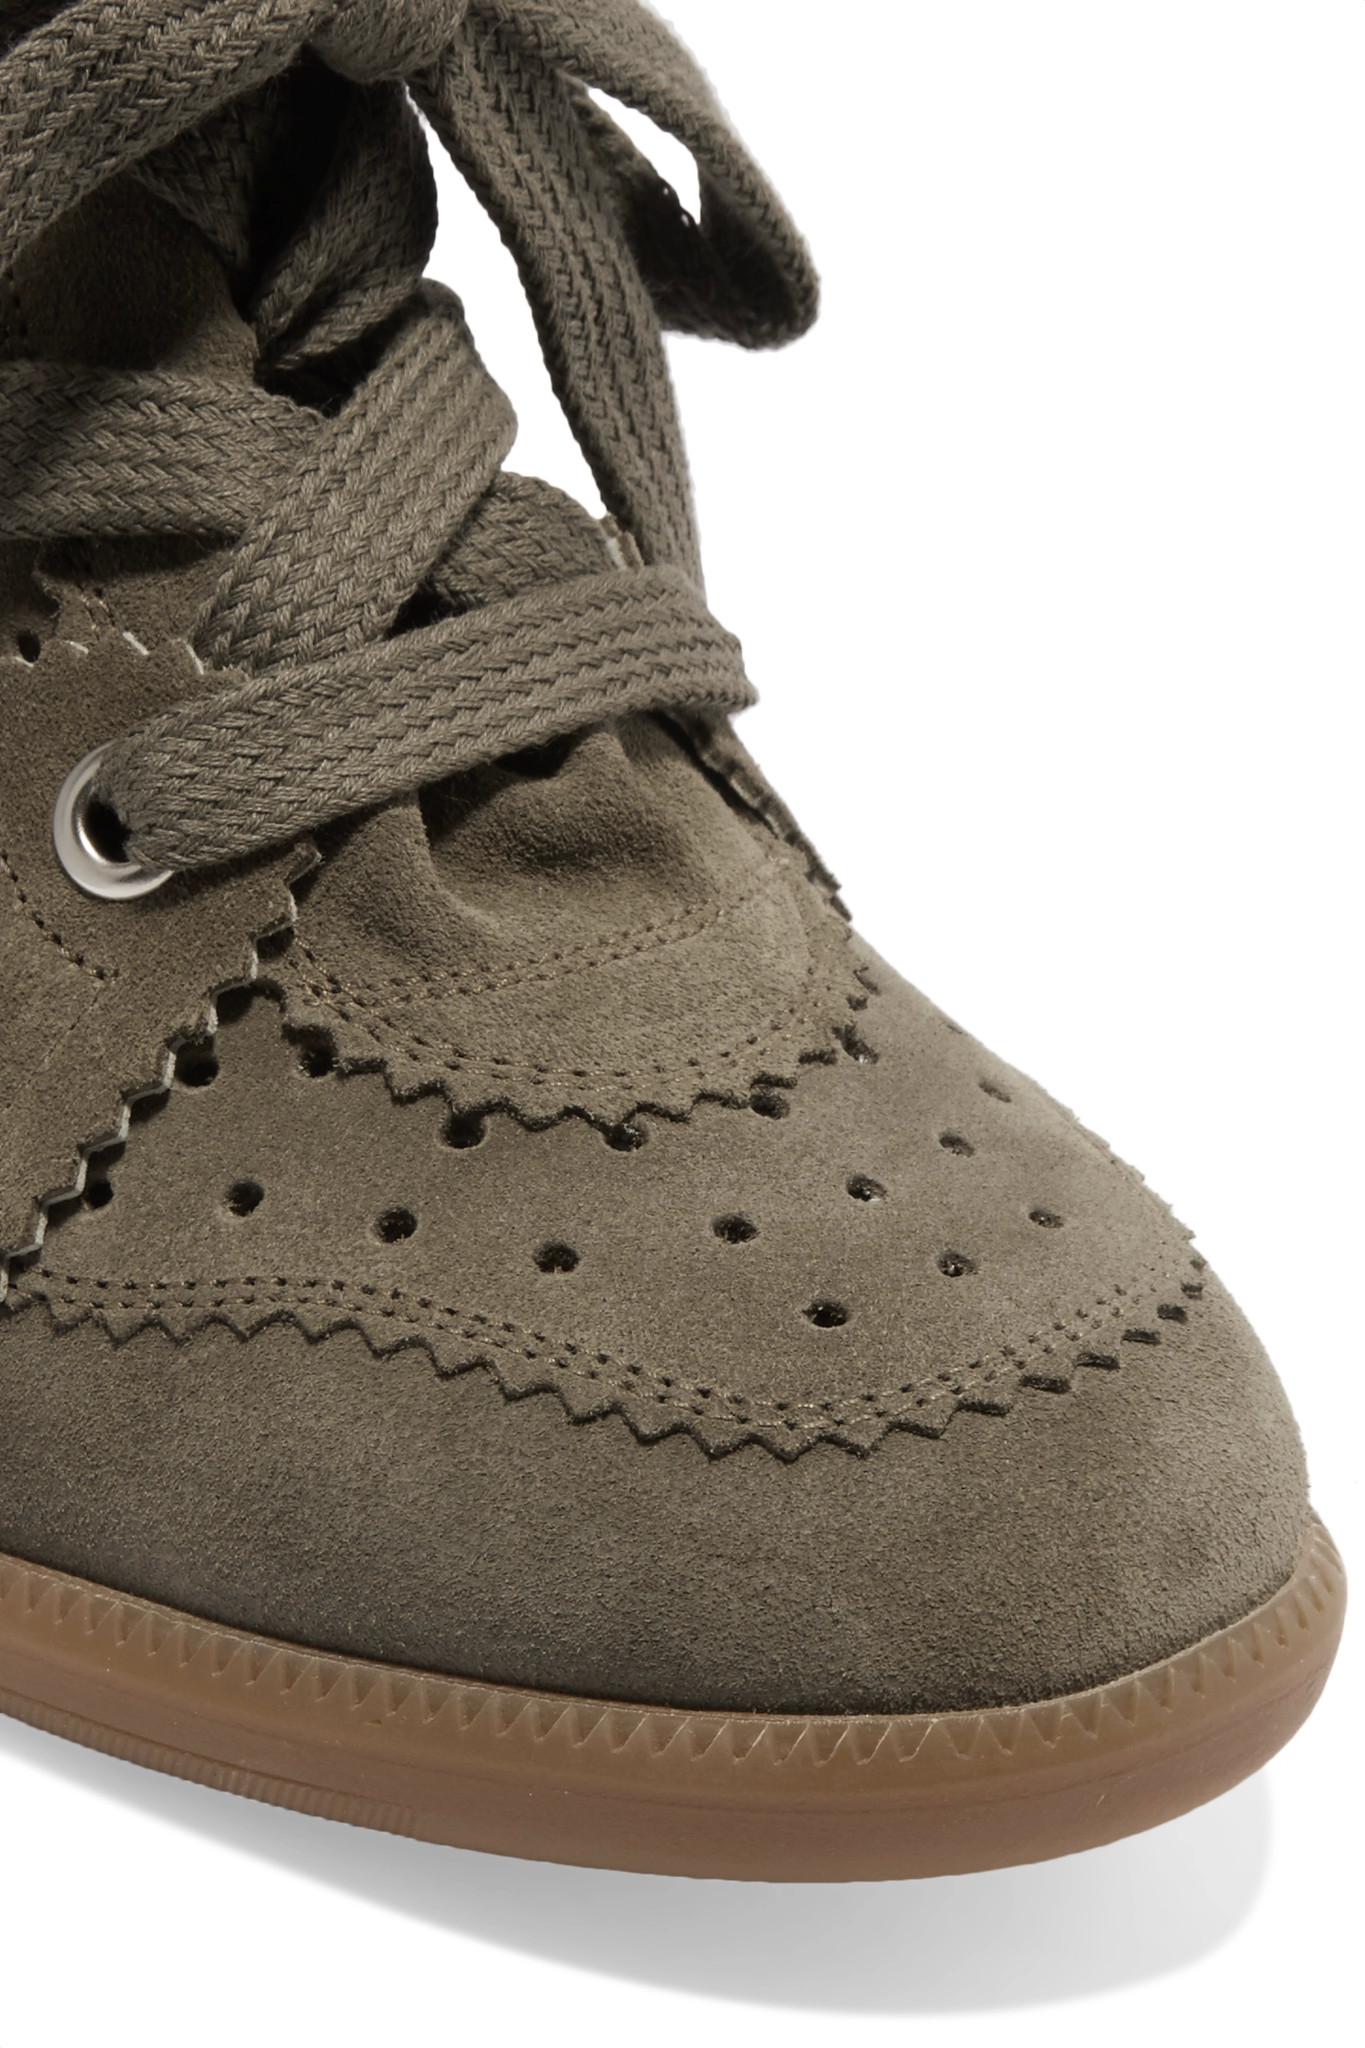 Isabel Marant Étoile Bobby Suede Wedge Sneakers Army Green - Lyst